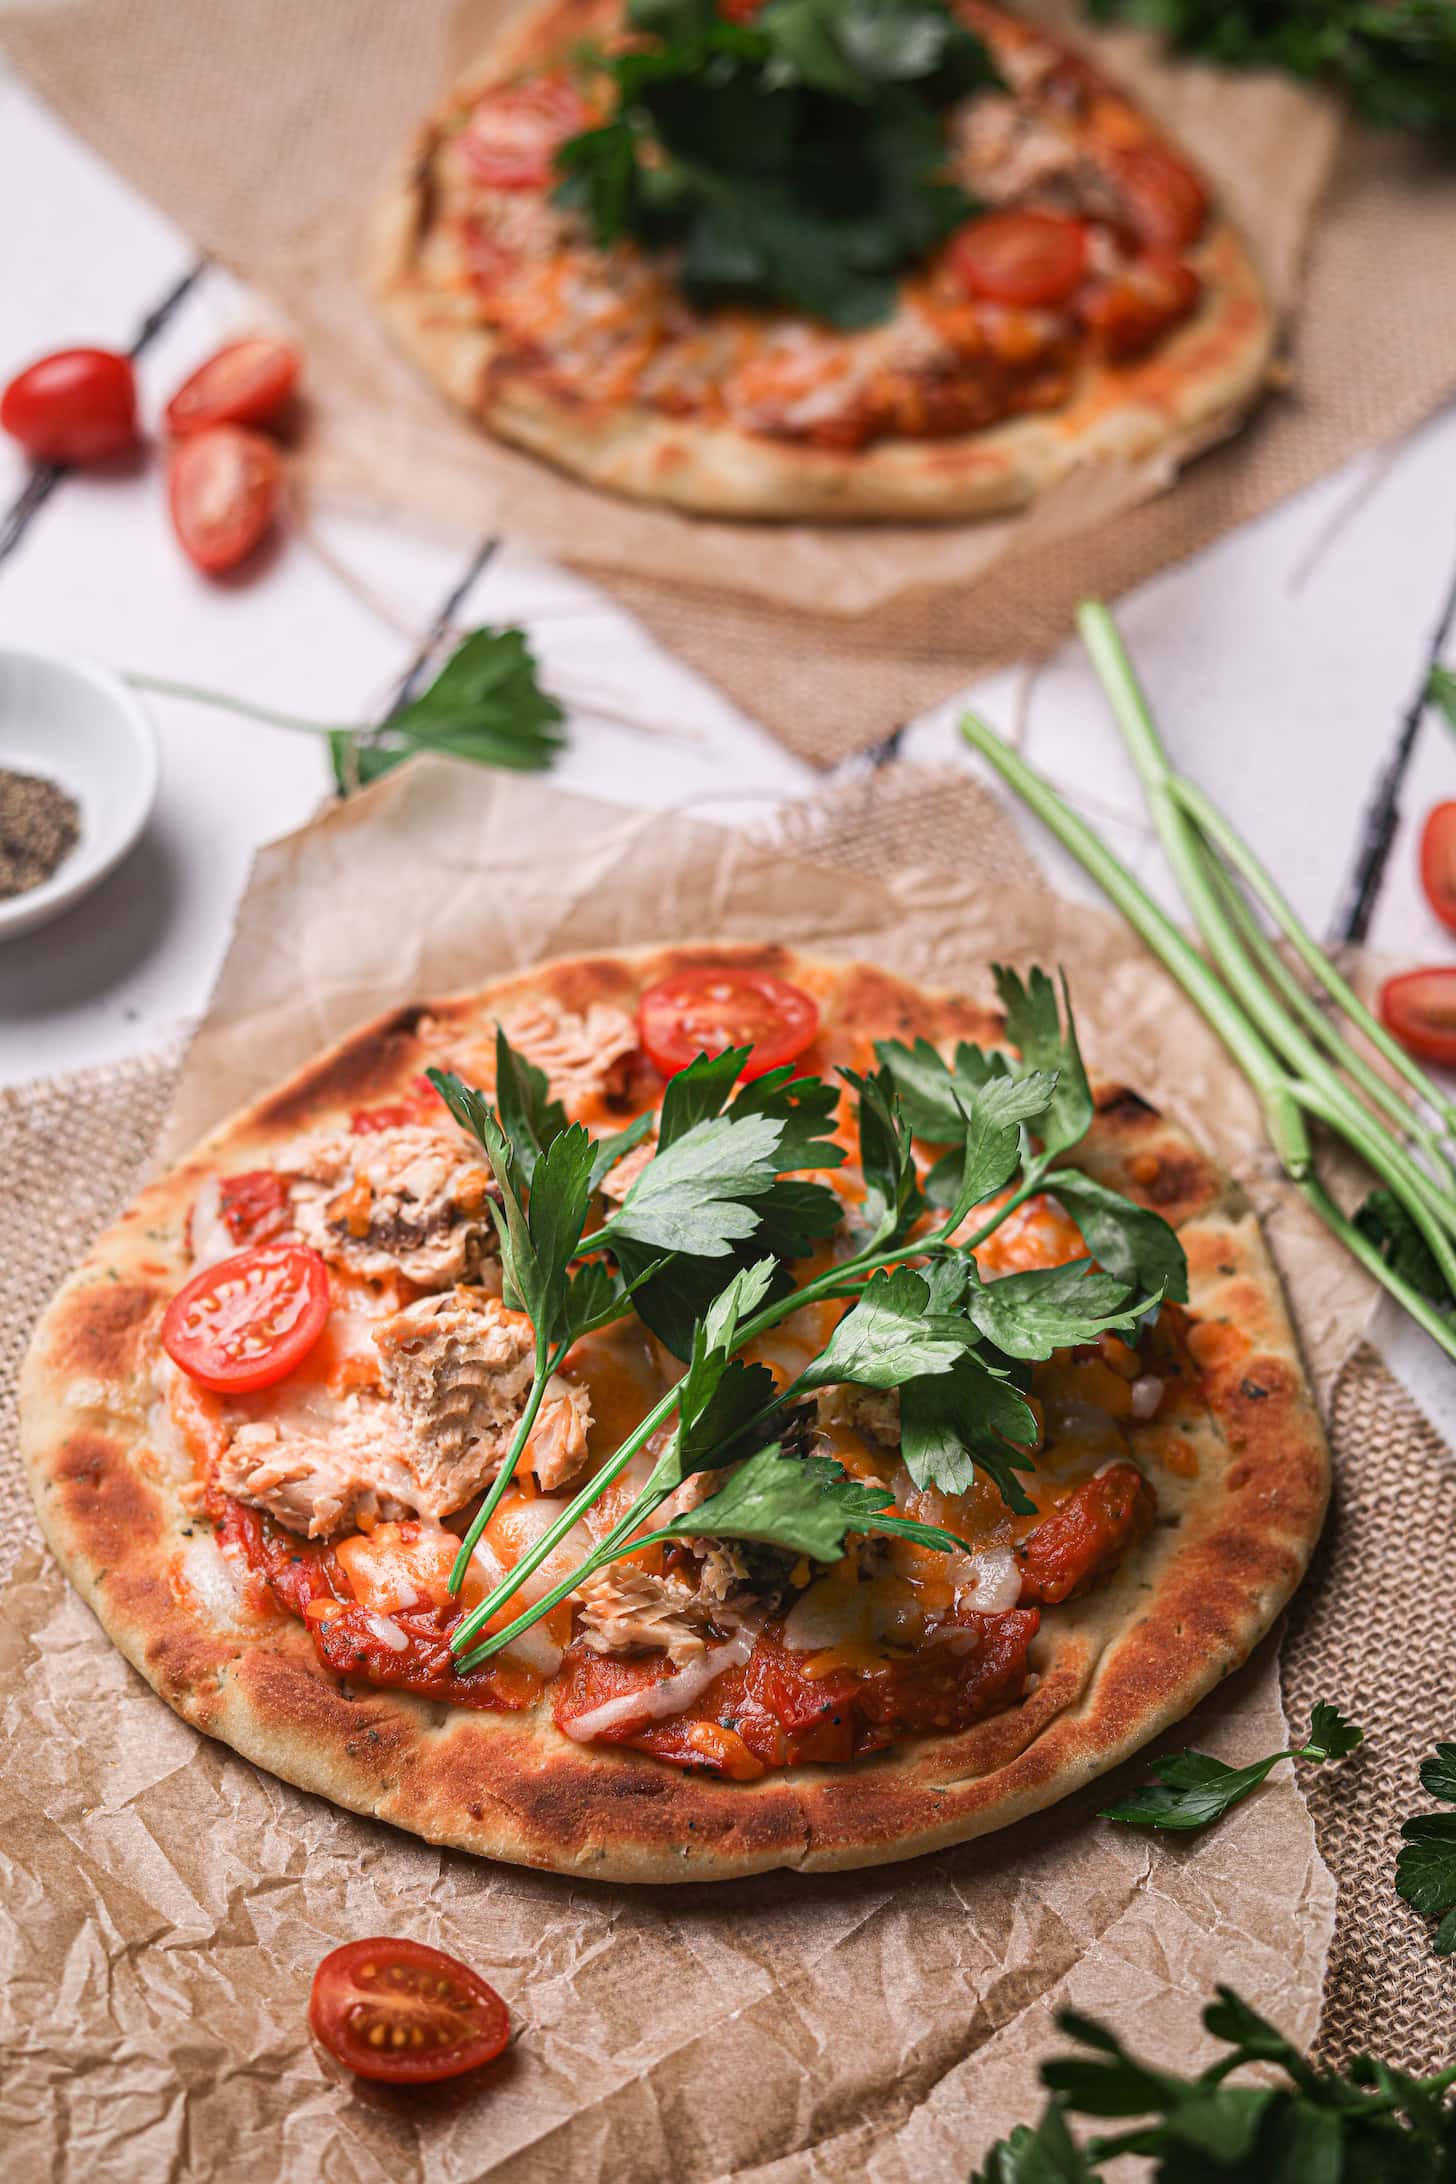 naan pizza topped with tomato sauce and chunks of canned salmon garnished with stems of fresh parsley.